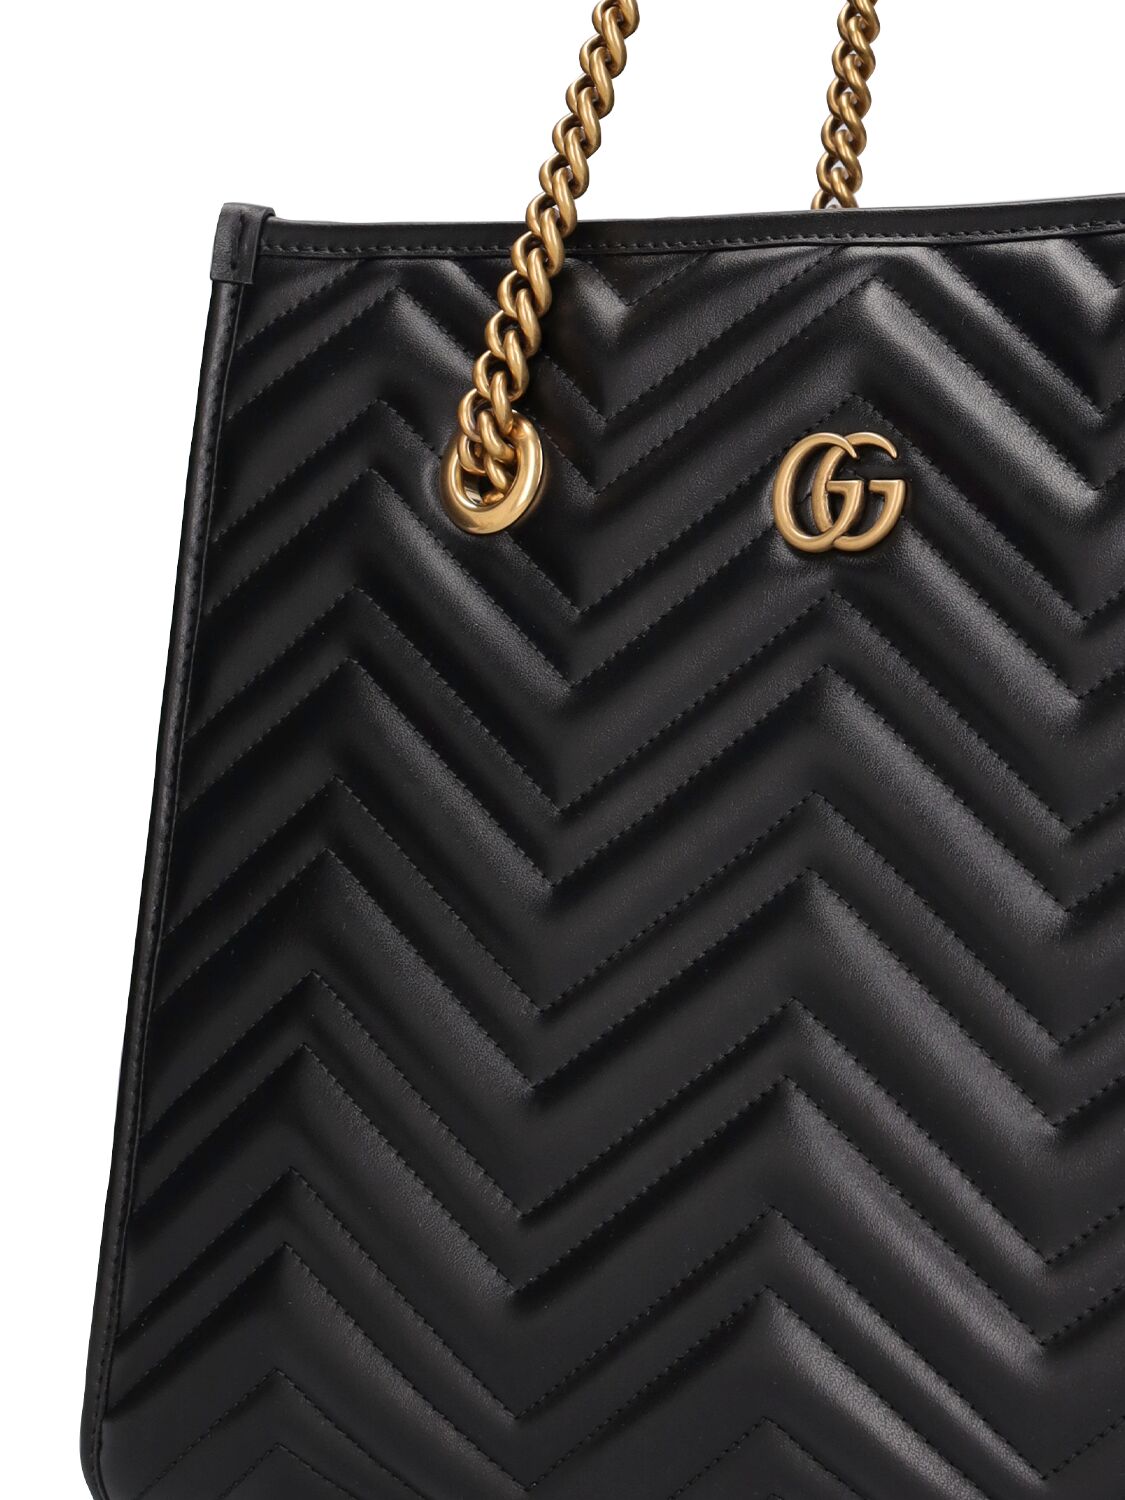 Shop Gucci Medium Gg Marmont Leather Tote Bag In Black